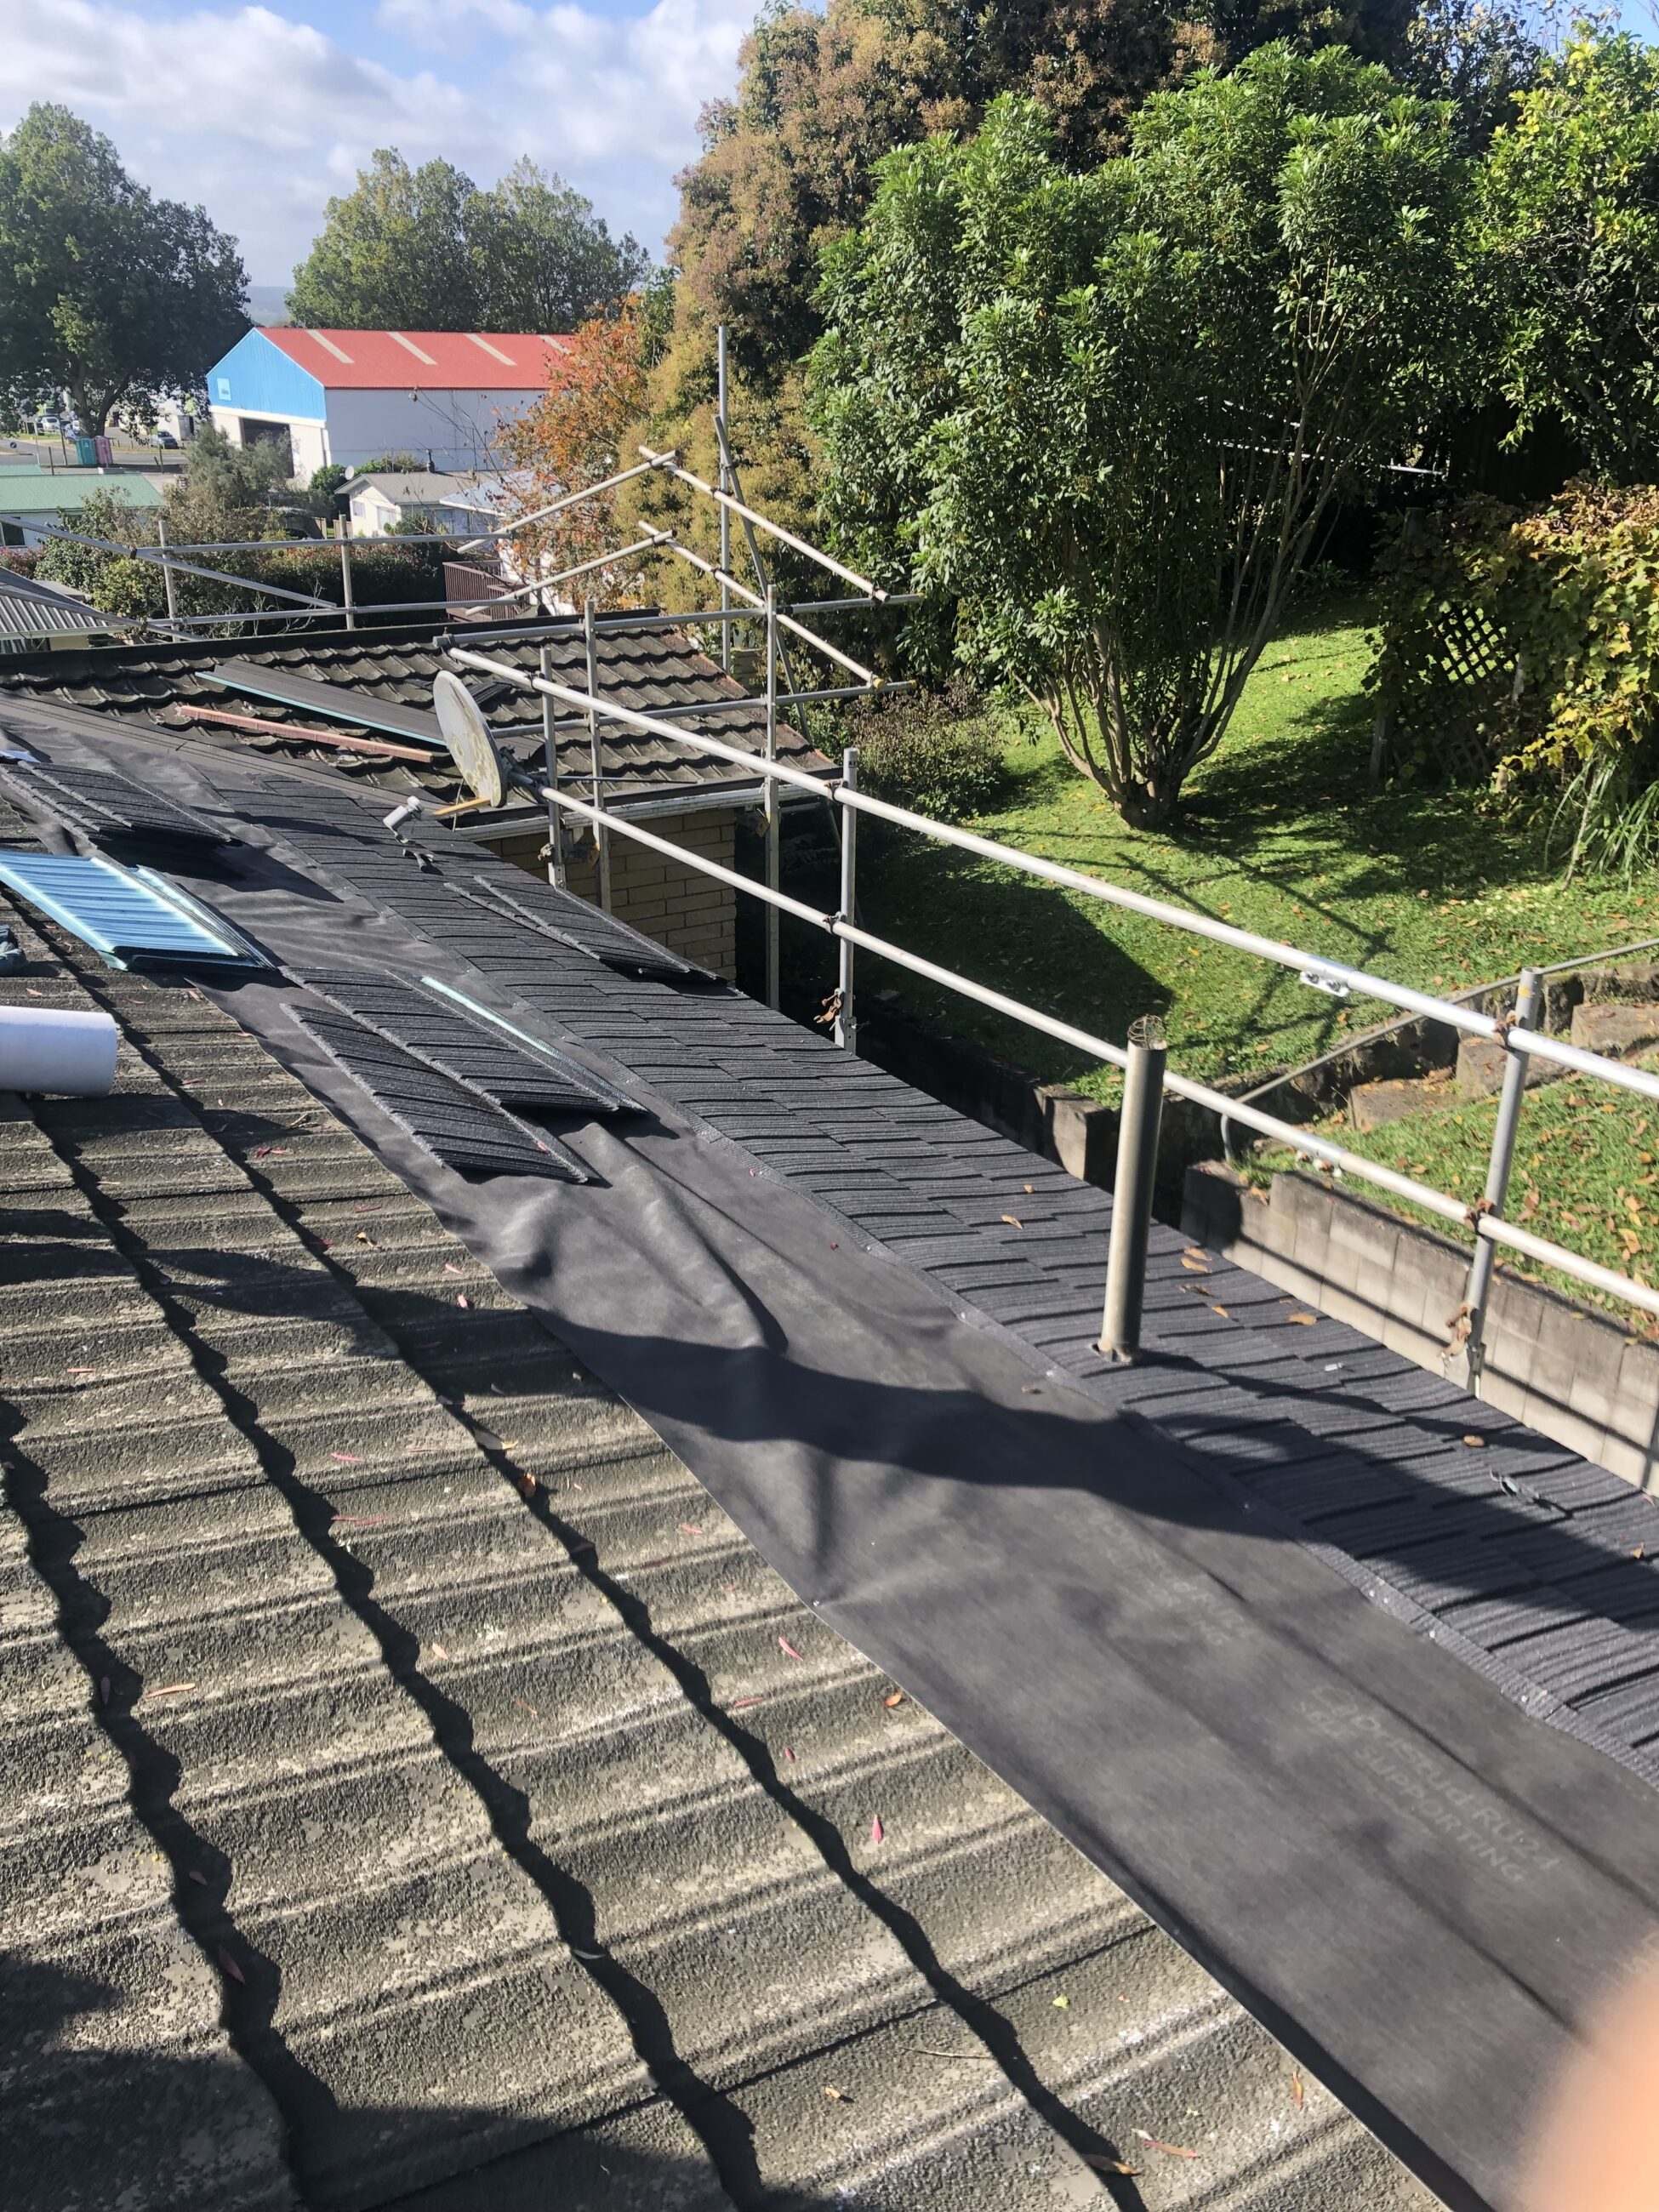 Skyhigh Roofing Tauranga, listed on Skilled Trades NZ® - A KIWI BUSINESS DIRECTORY